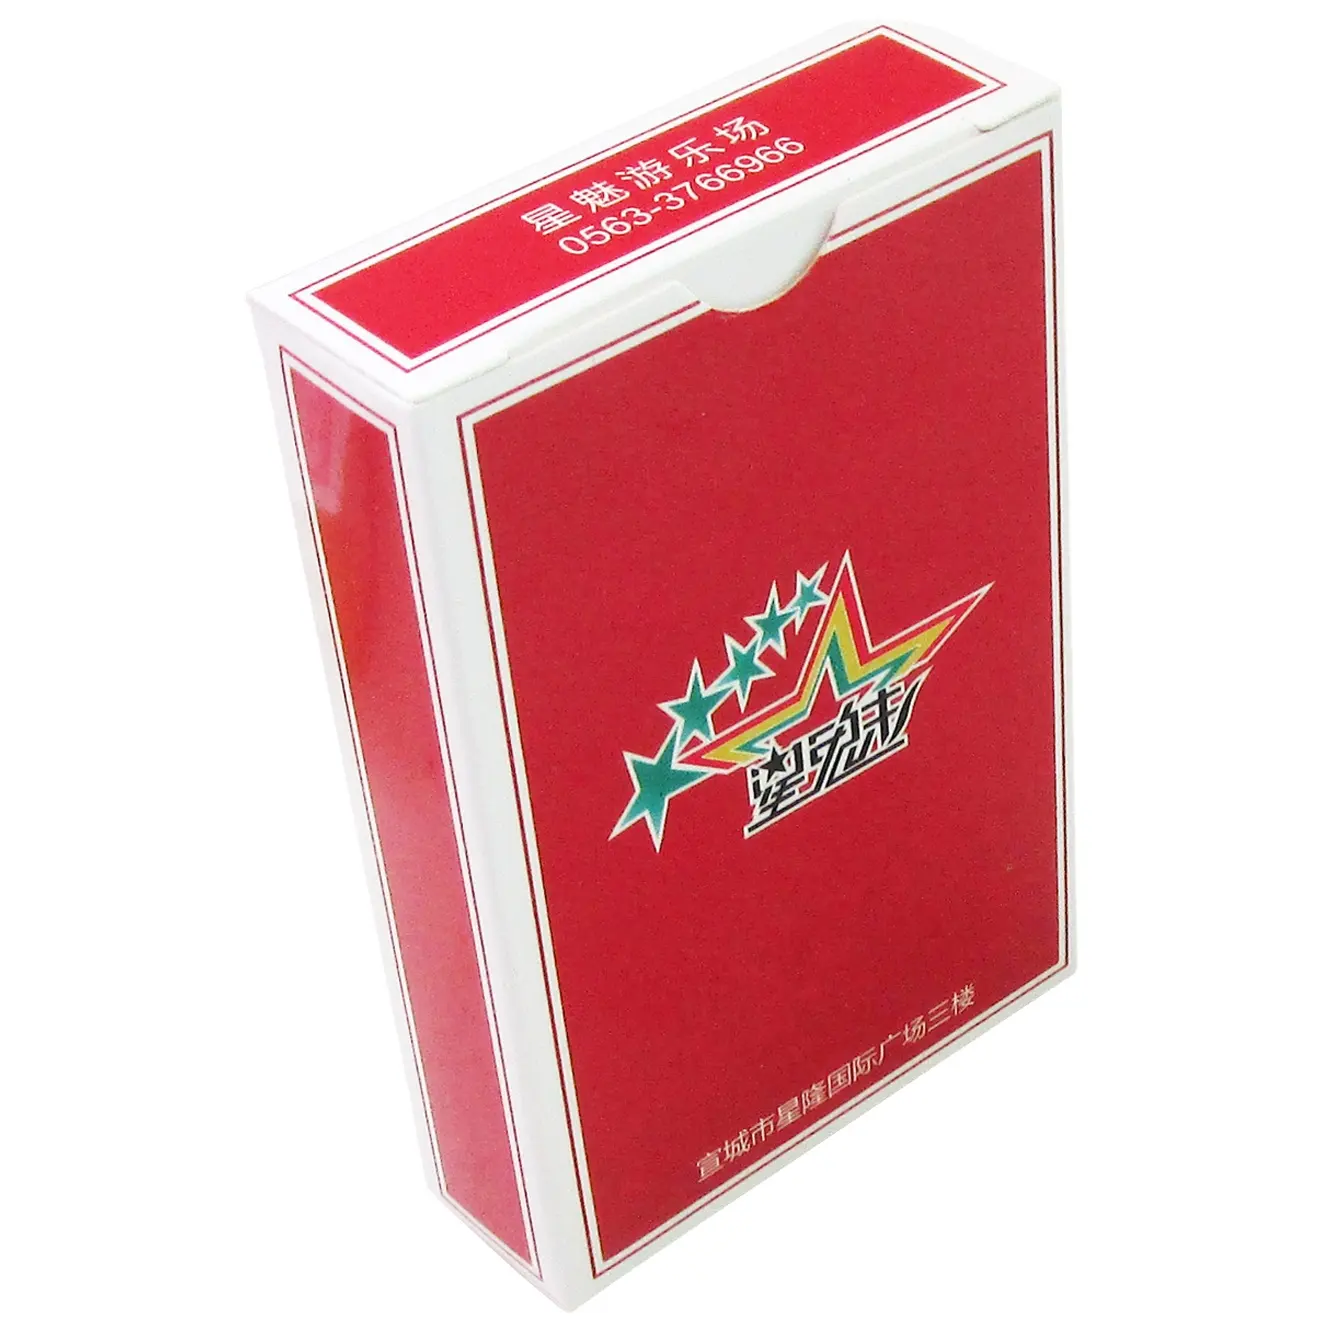 Custom Playing Card Boxes with You Owe Brand Super Quality Trading Card Deck Case